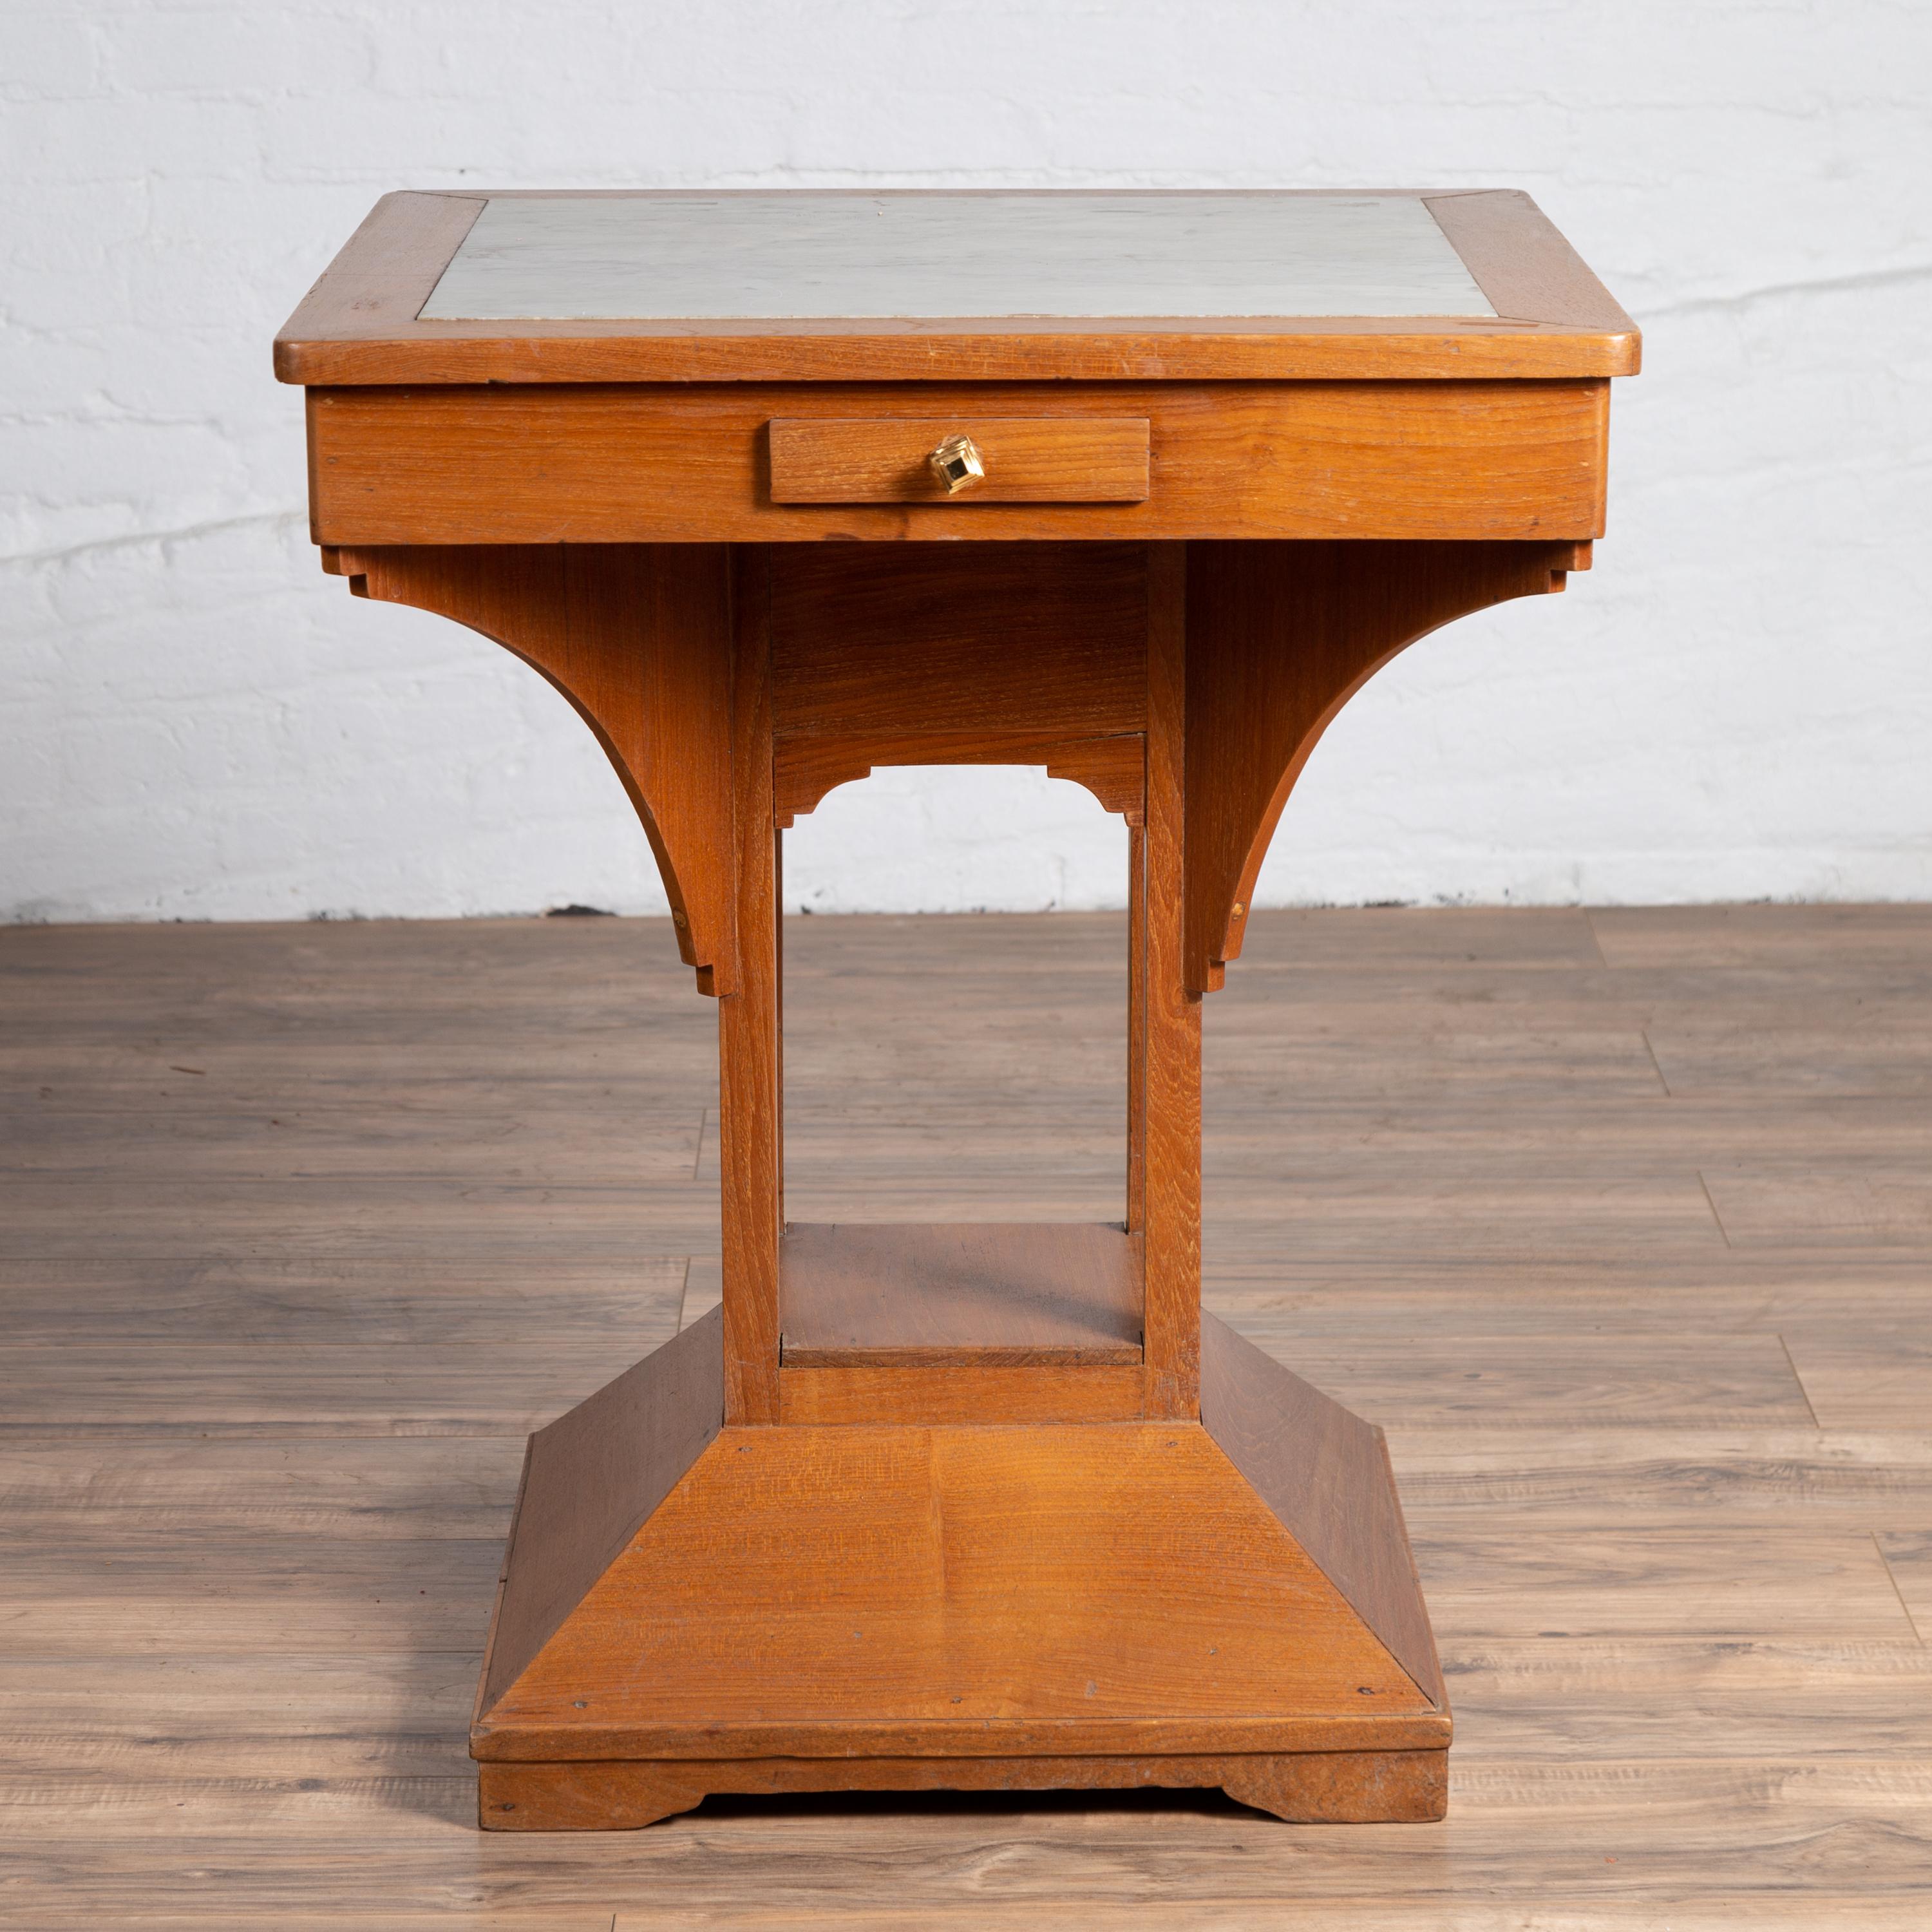 A Dutch Colonial vintage Indonesian square center table from the mid-20th century, with marble inset. Born in Indonesia during the midcentury period, this elegant center table features a square top with white veined marble inset. The apron,